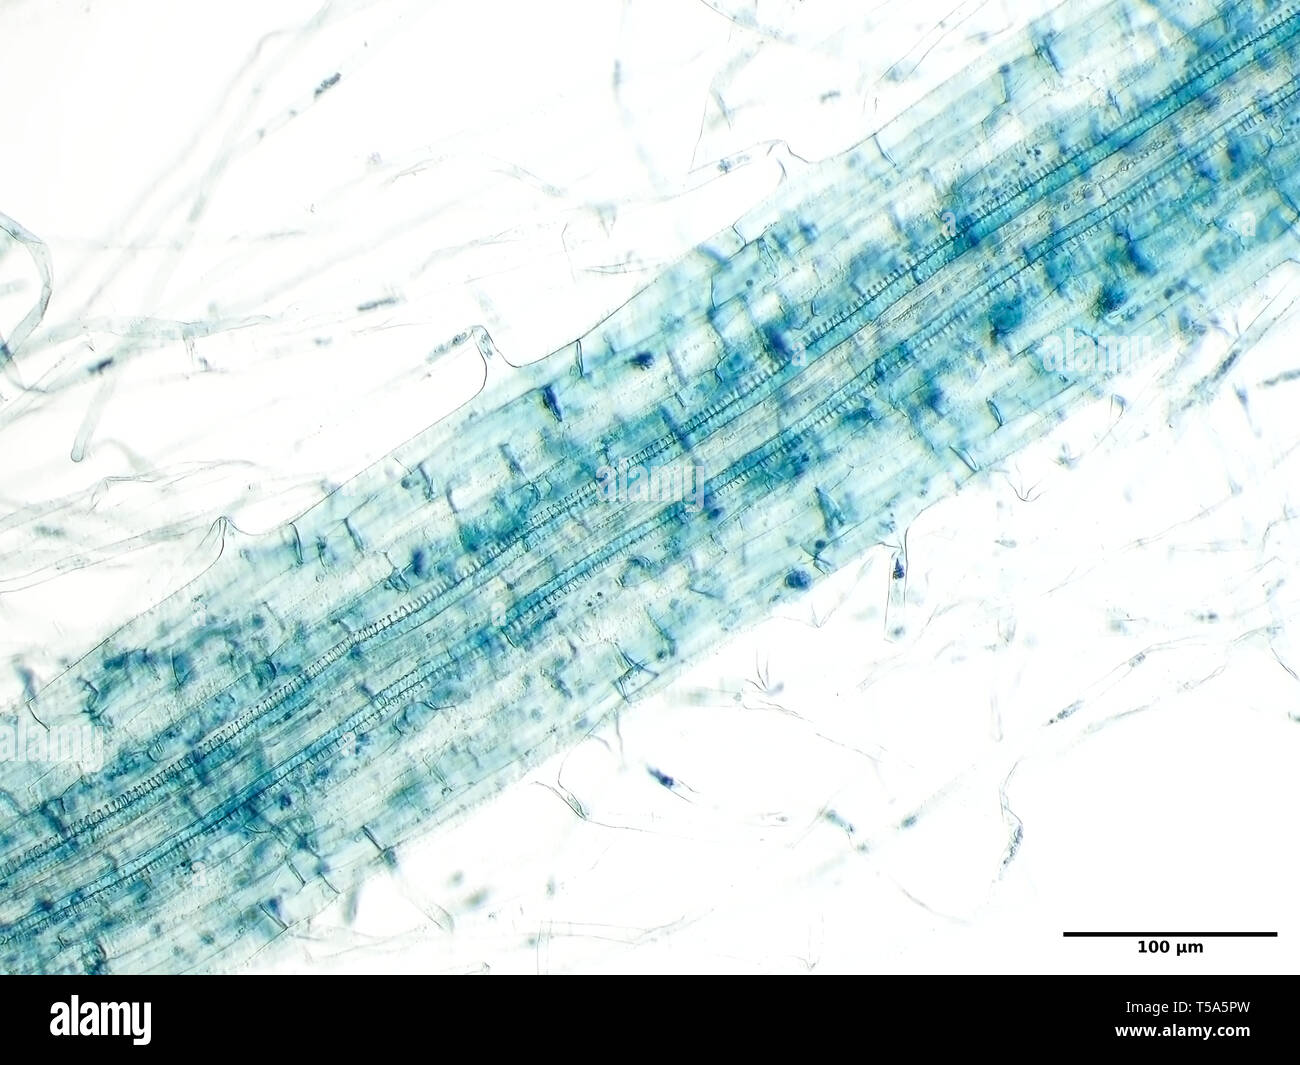 Turnip seedling root with root hairs under the microscope Stock Photo